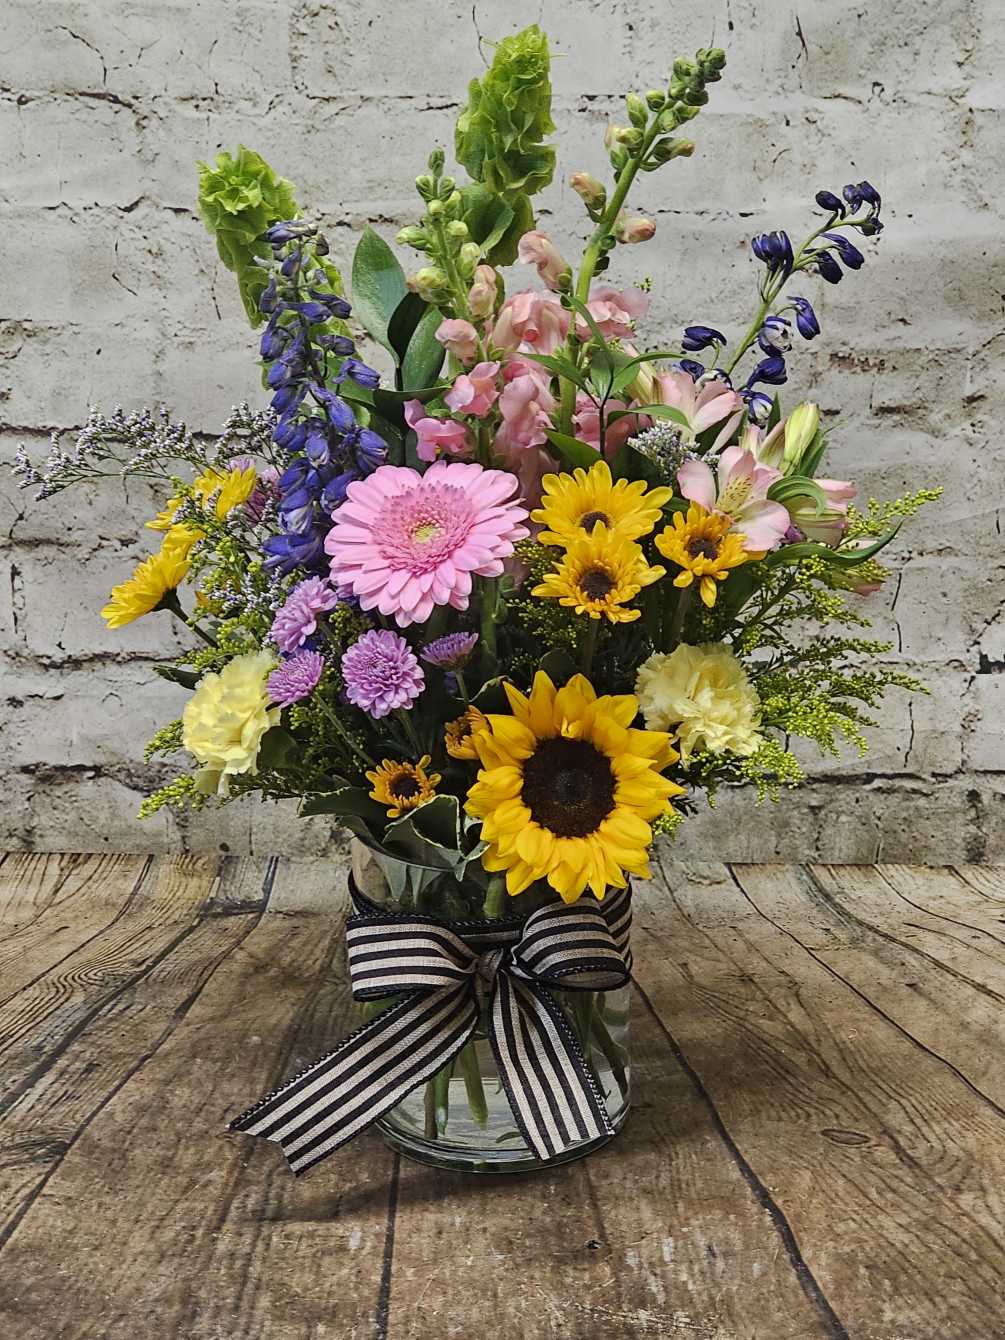 A cheerful mix of garden flowers including Delphinium,  snapdragon,  sunflowers